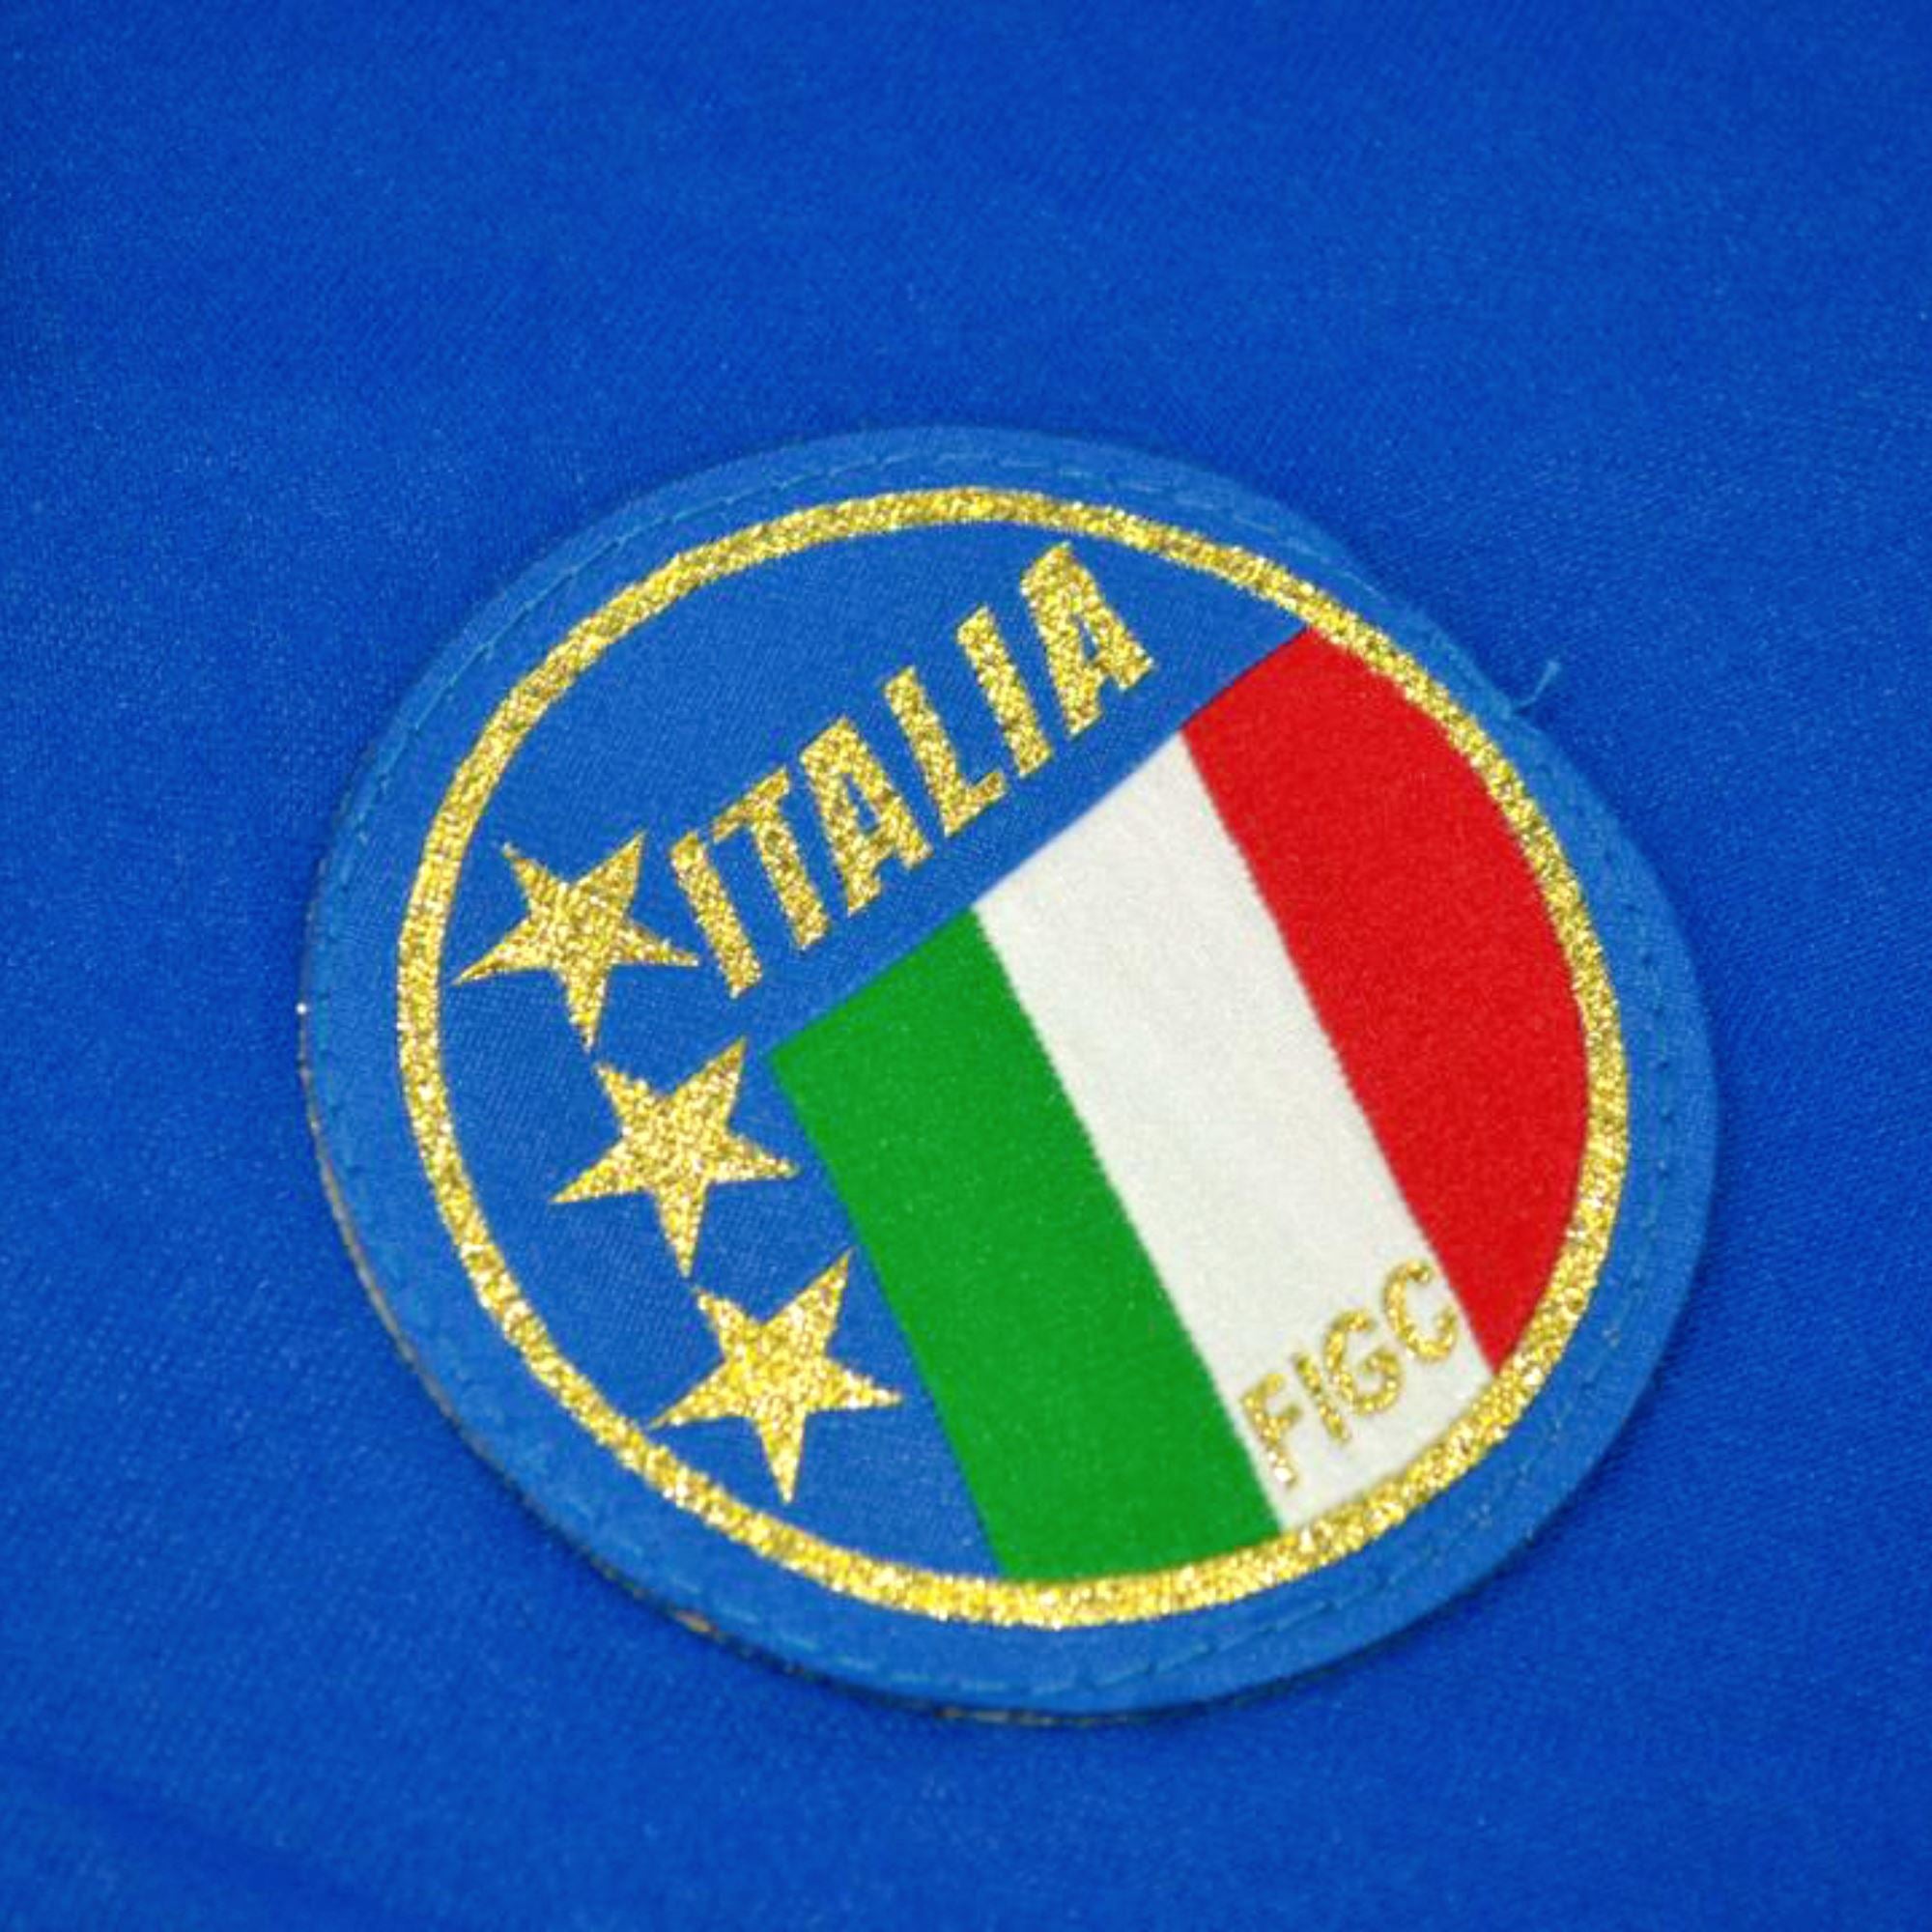 1990 Italy World Cup Home jersey - ITASPORT